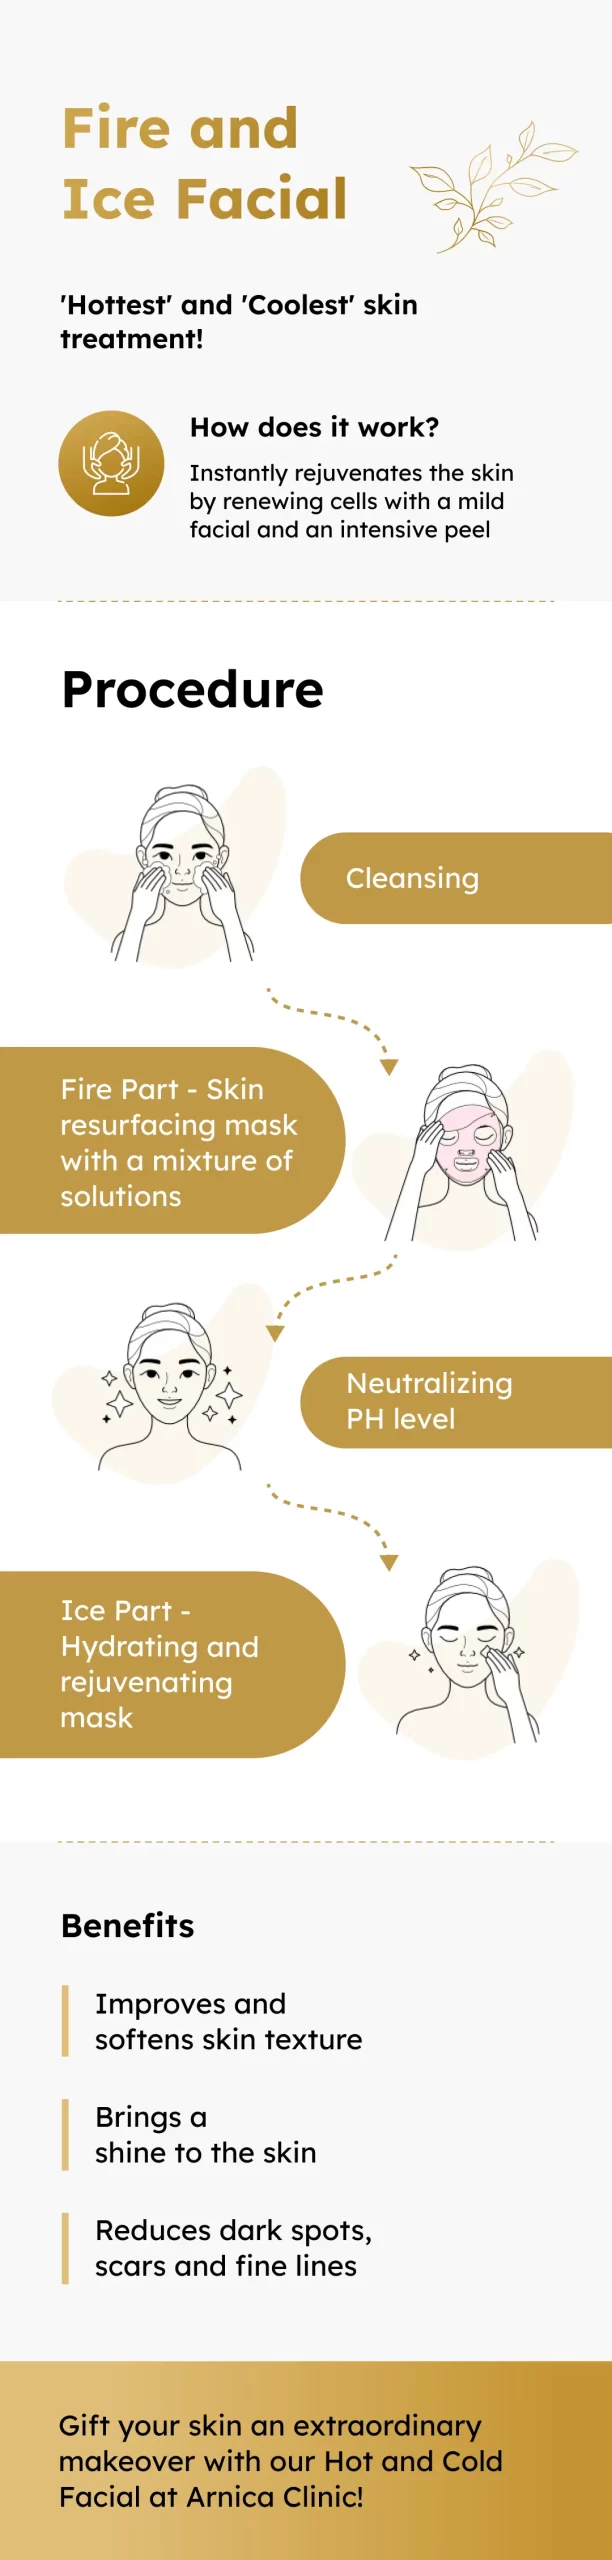 Fire and Ice Facial in Pune Infographic